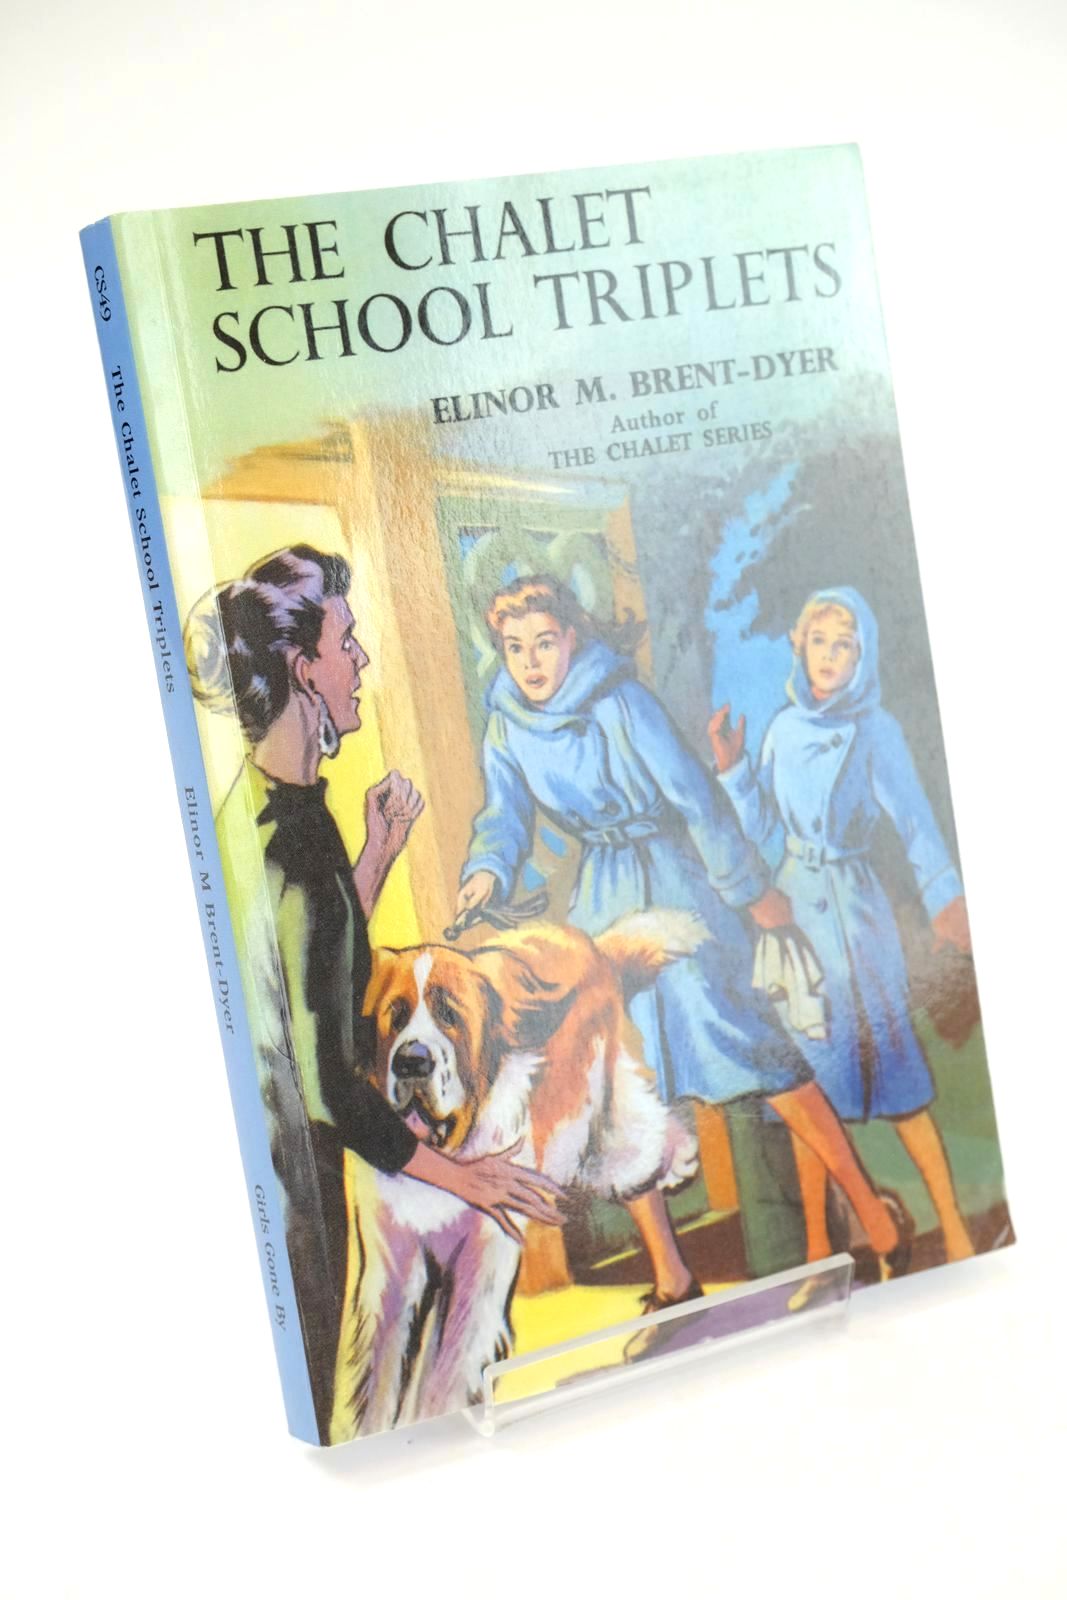 Photo of THE CHALET SCHOOL TRIPLETS written by Brent-Dyer, Elinor M. published by Girls Gone By (STOCK CODE: 1324450)  for sale by Stella & Rose's Books